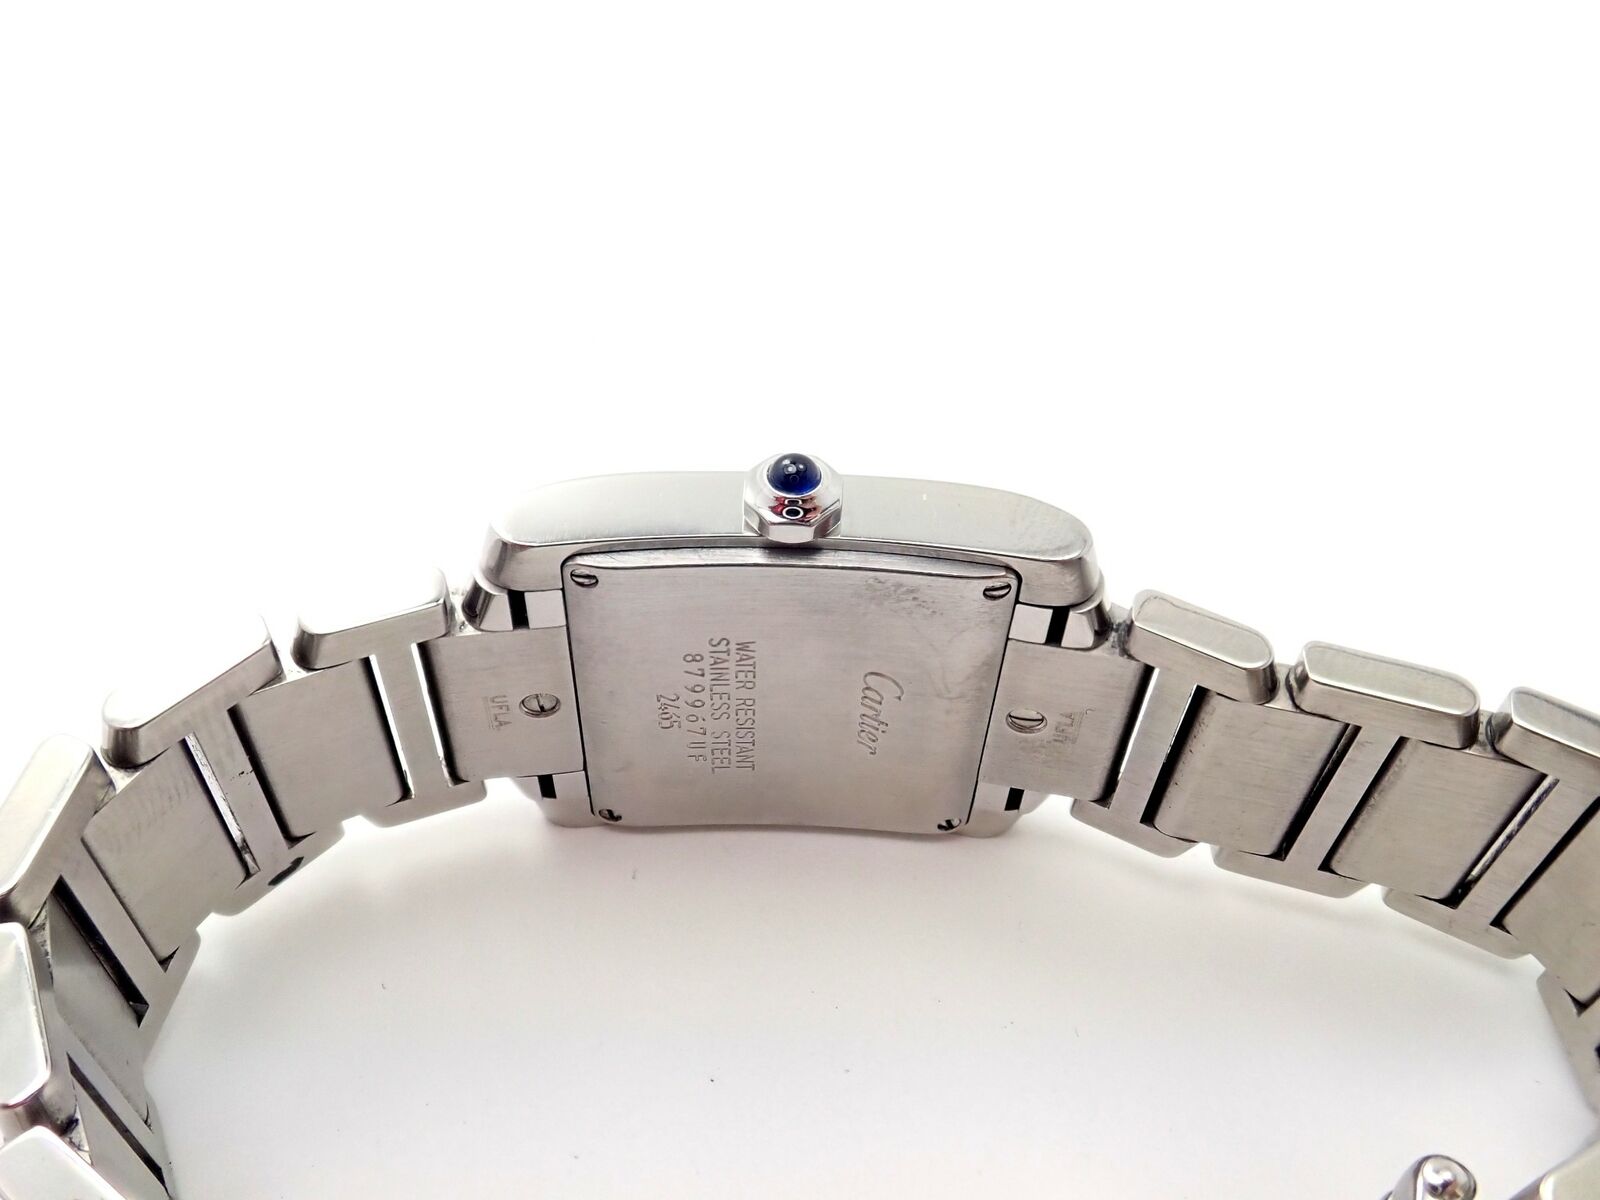 Cartier Jewelry & Watches:Watches, Parts & Accessories:Watches:Wristwatches Authentic! Cartier Stainless Steel Ladies Tank Francaise Quartz Watch 2465